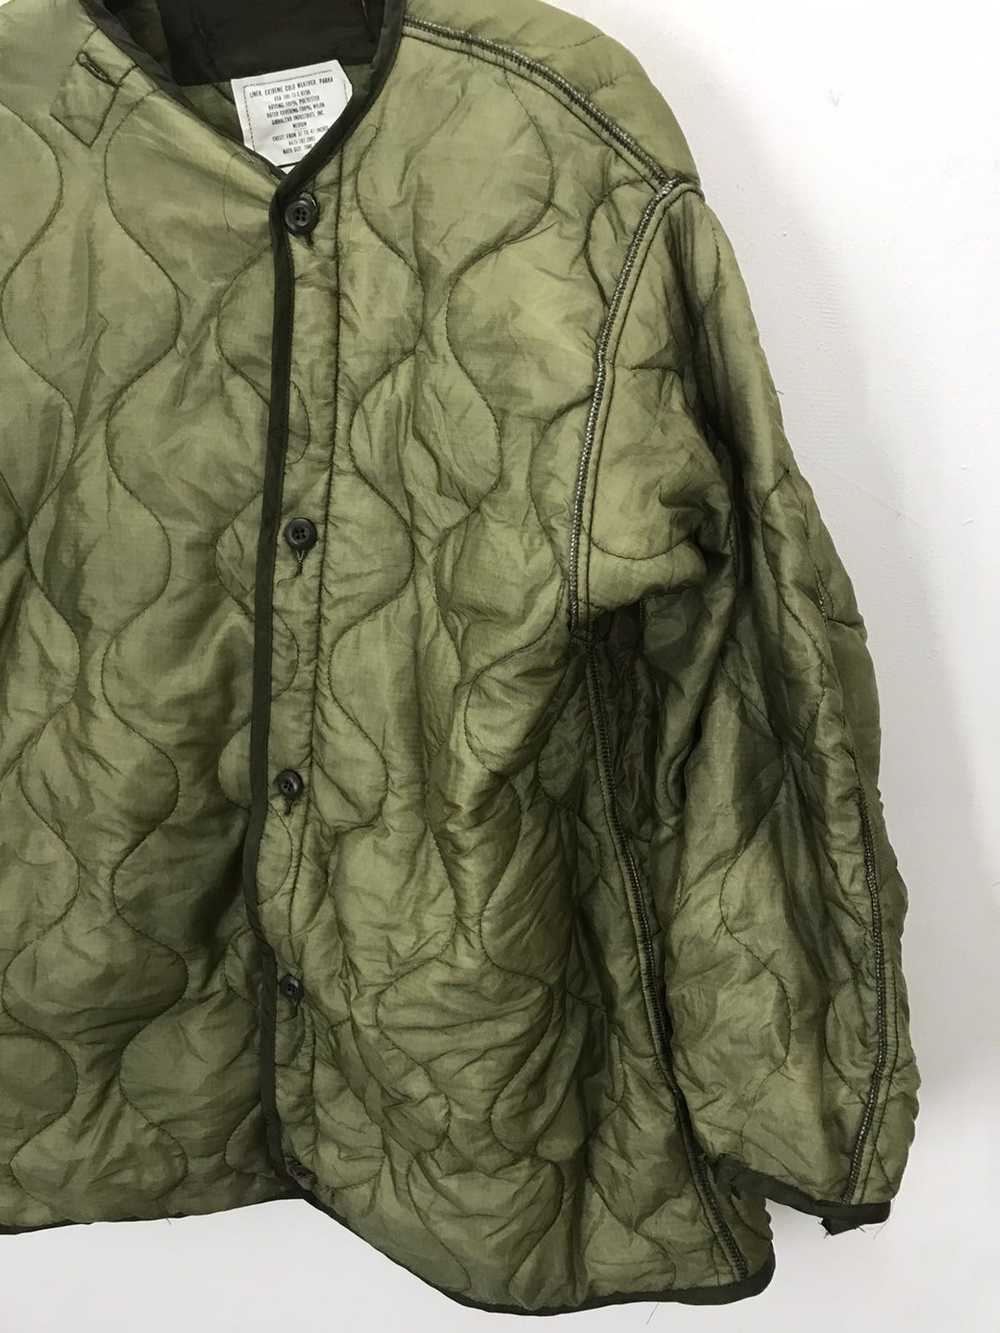 Military × Vintage Vintage Quilted lining inner m… - image 6